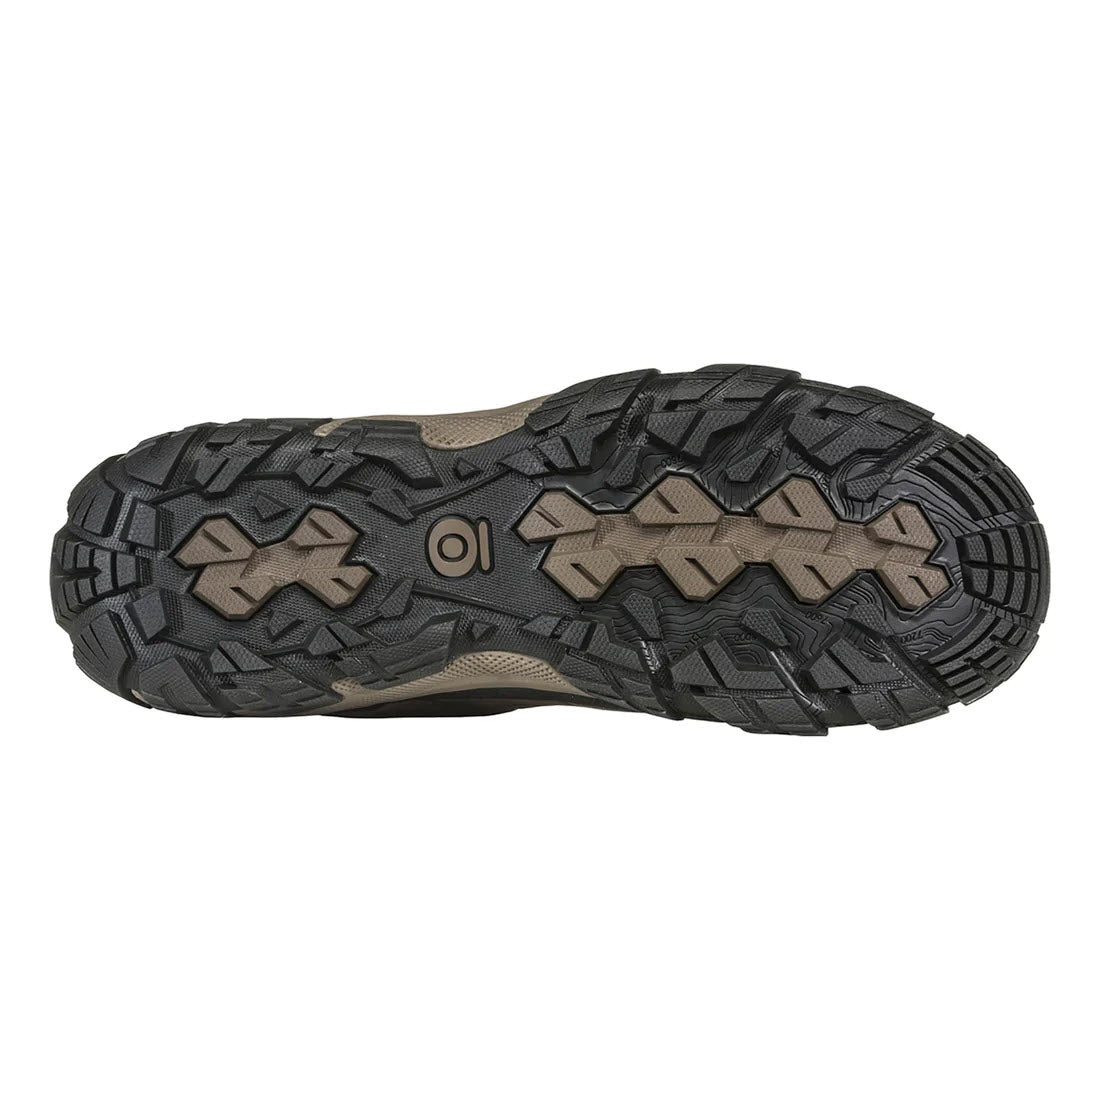 Bottom view of an OBOZ SAWTOOTH X MID ROCKFALL - MENS hiking boot sole with deep treads and grip patterns featuring B-DRY waterproof technology, colored in grey and black.